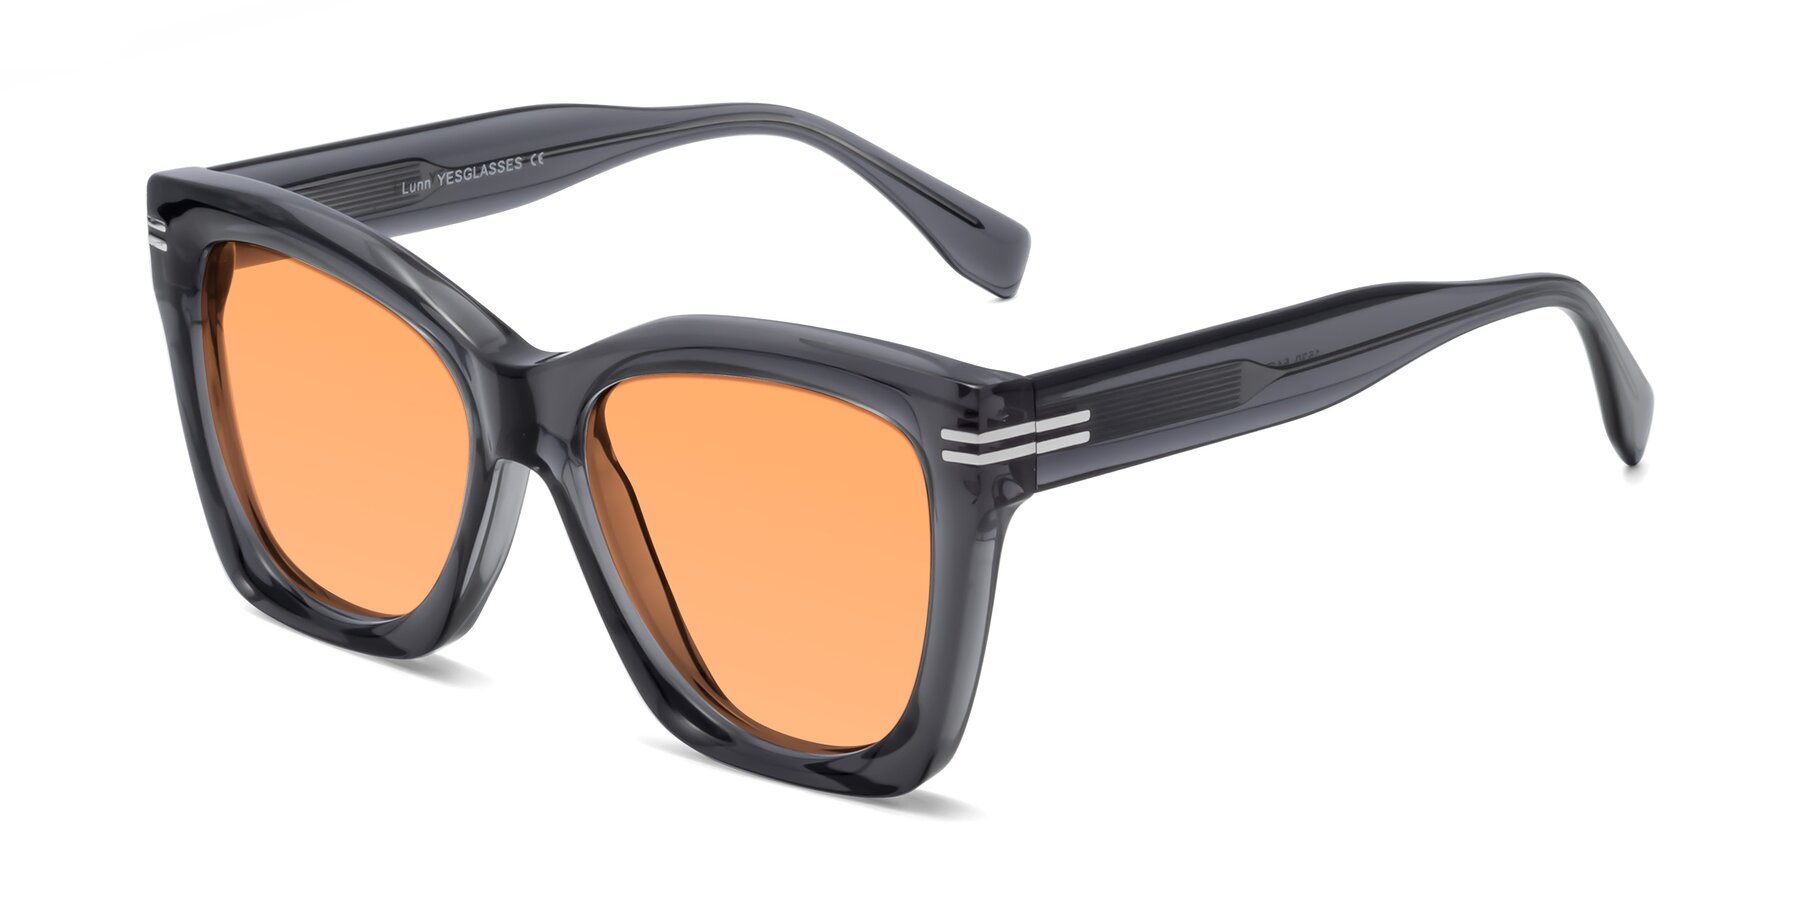 Angle of Lunn in Translucent Gray with Medium Orange Tinted Lenses